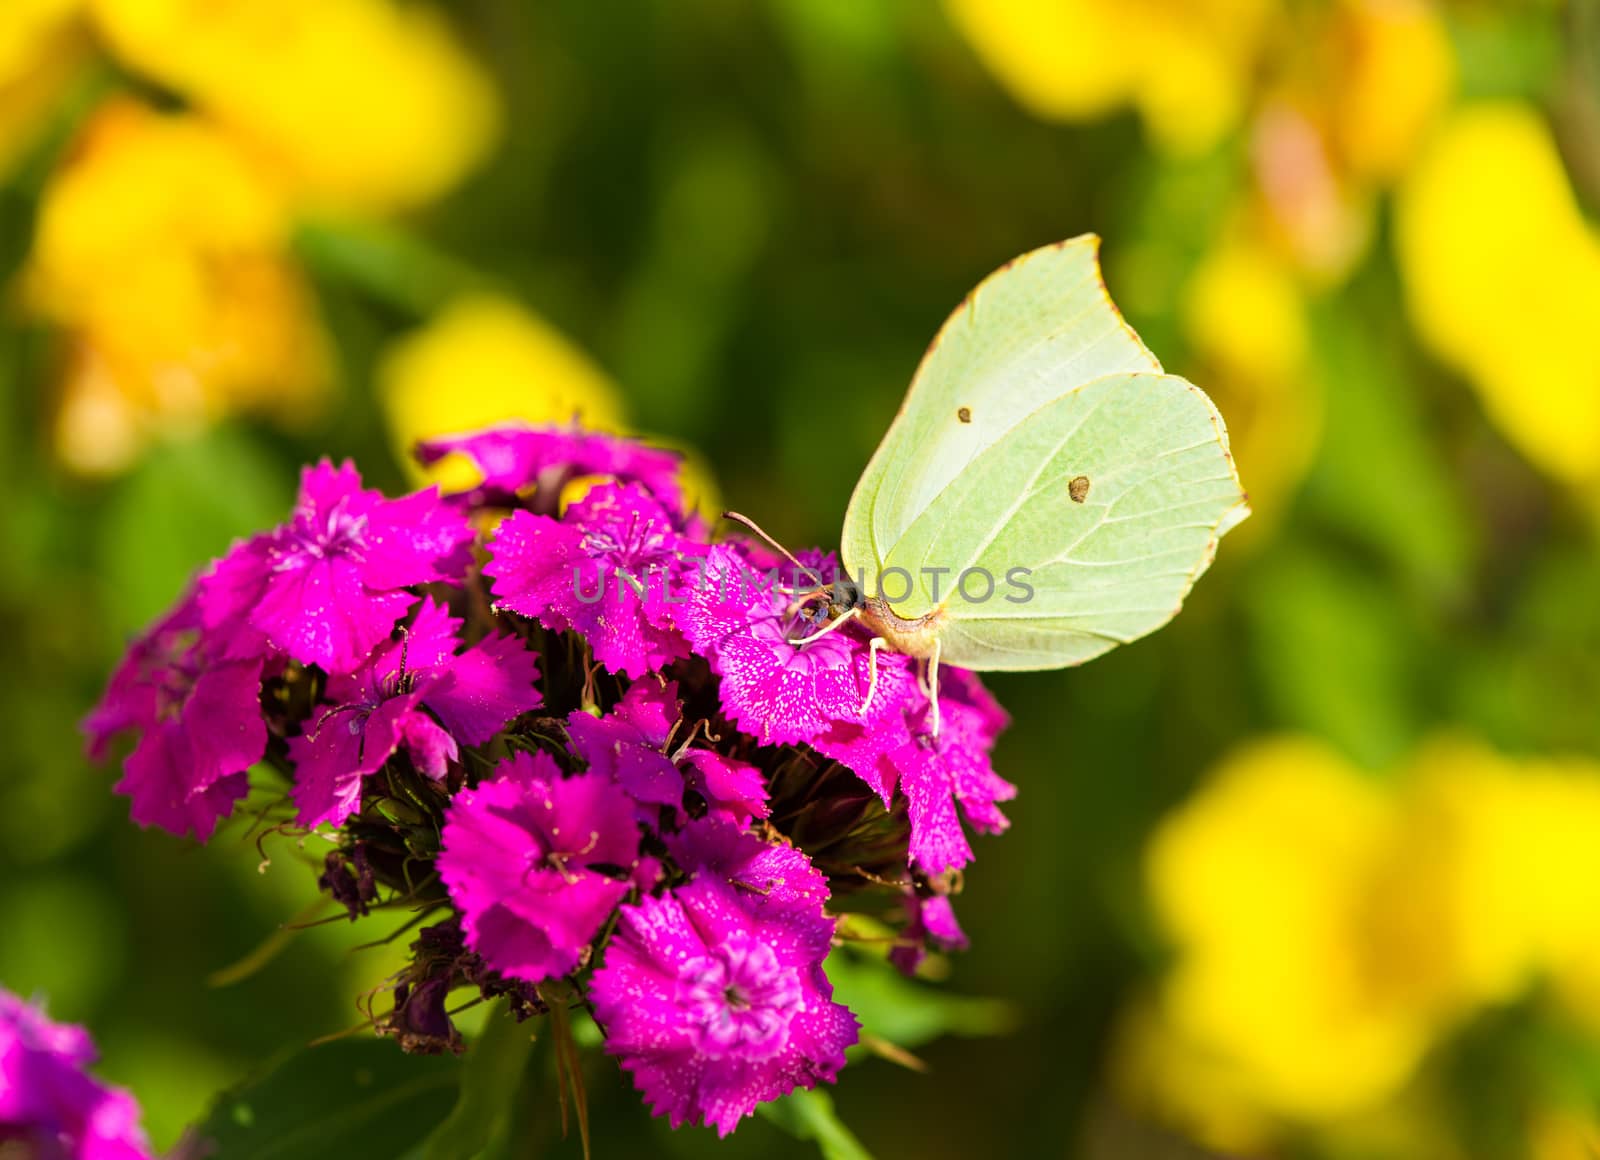 Brimstone butterfly on pink flower by Draw05